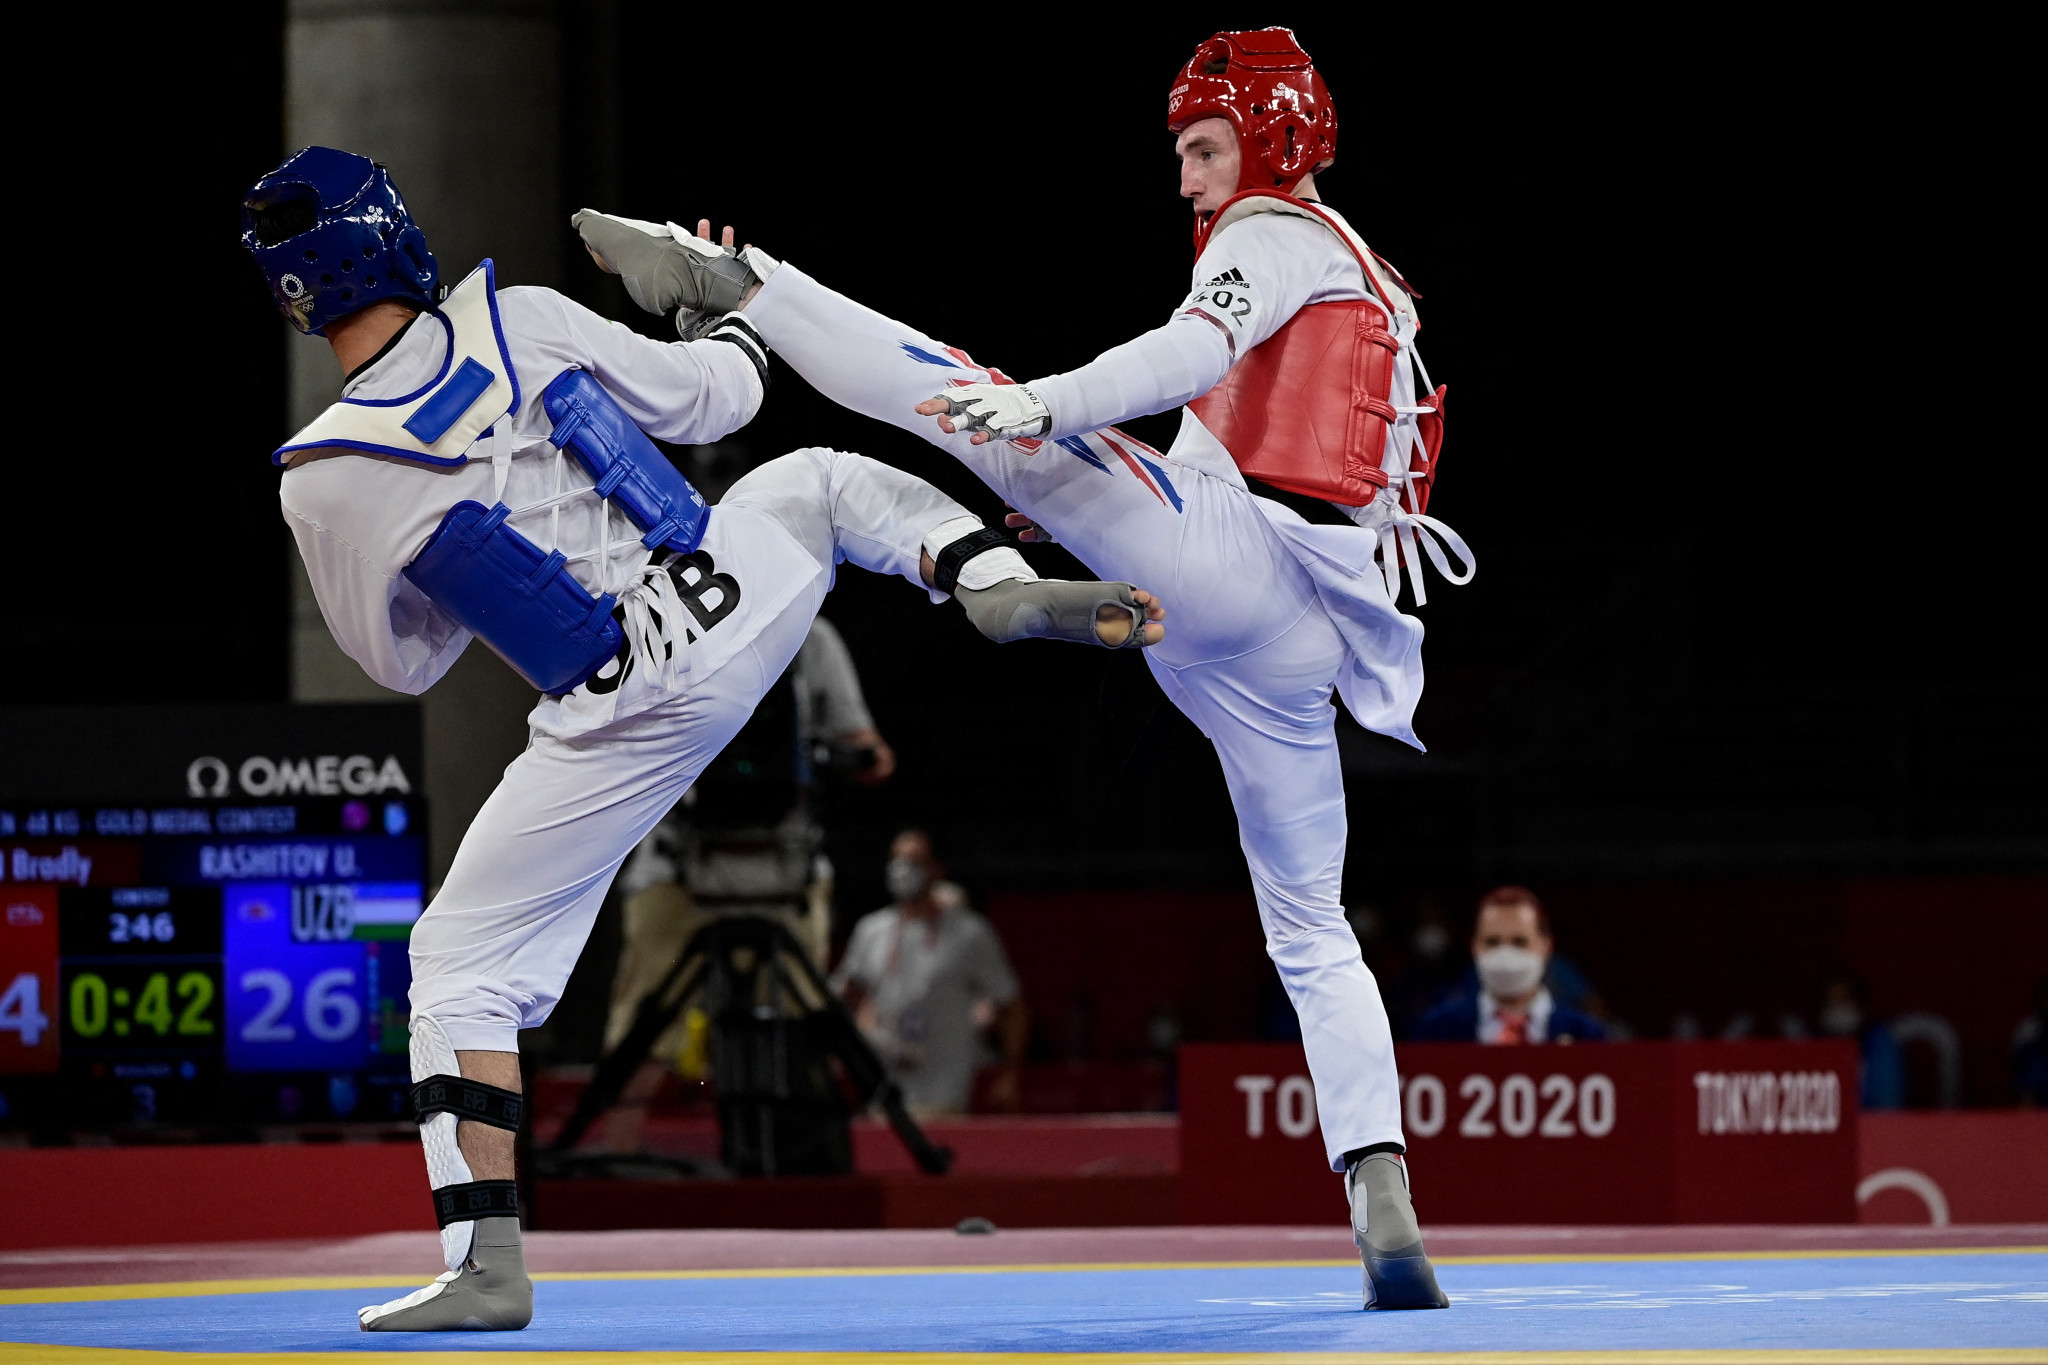 Bradly Sinden, in red, was one of five British taekwondo medallists across the Tokyo 2020 Olympics and Paralympics ©Getty Images